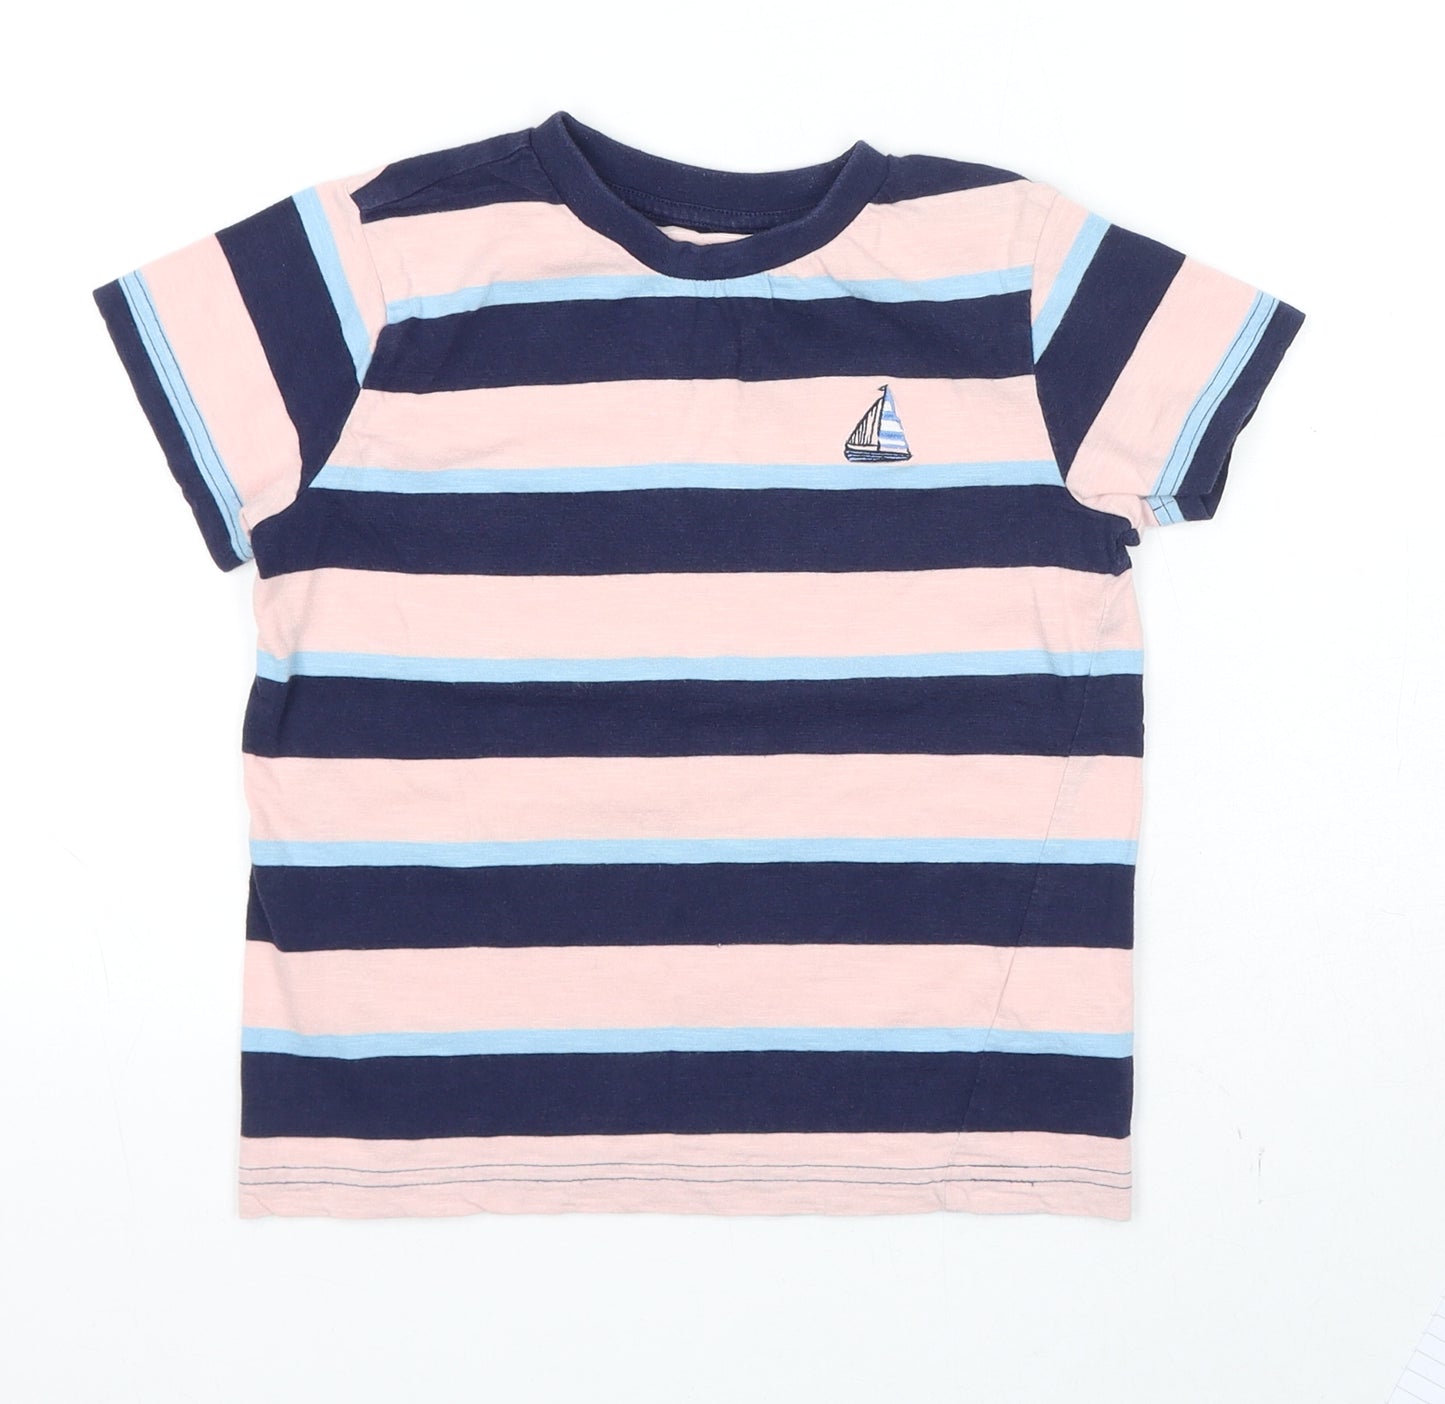 NEXT Boys Blue Striped Cotton Basic T-Shirt Size 5-6 Years Round Neck Pullover - Sail Boat